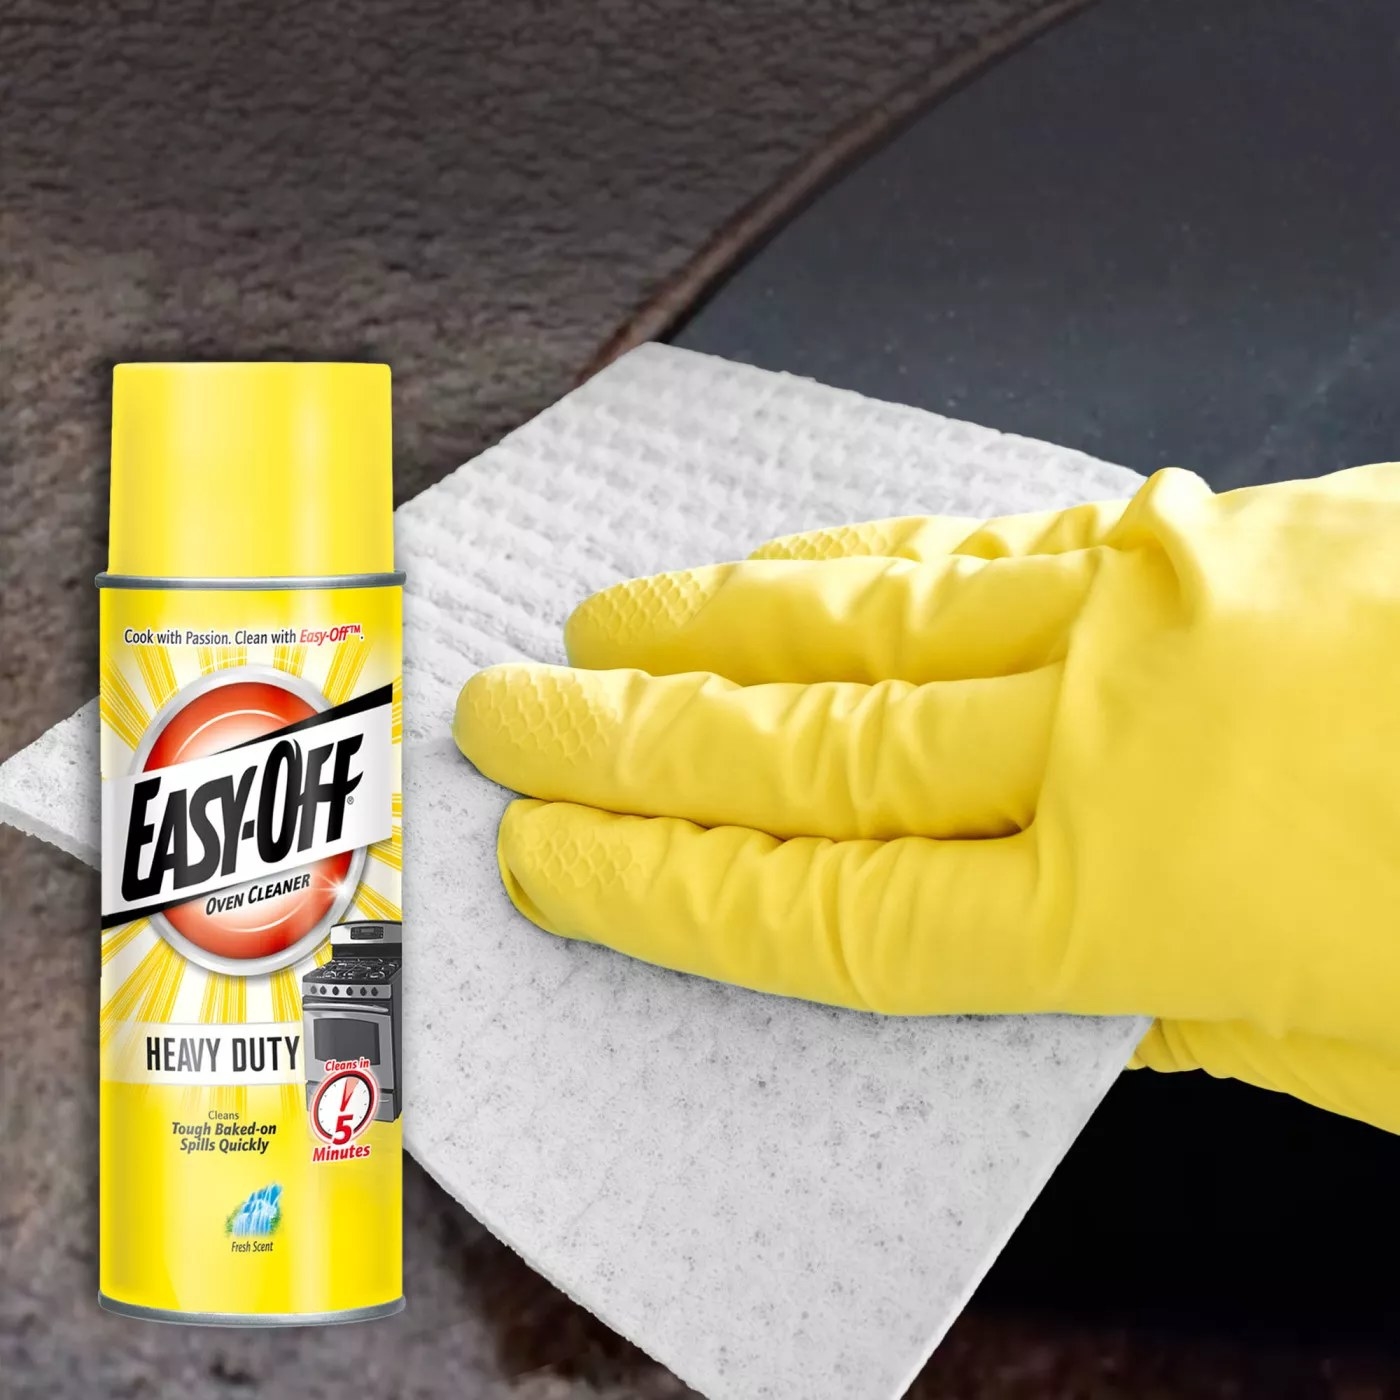 The bottle of grease remover placed over an image of a hand scrubbing grease